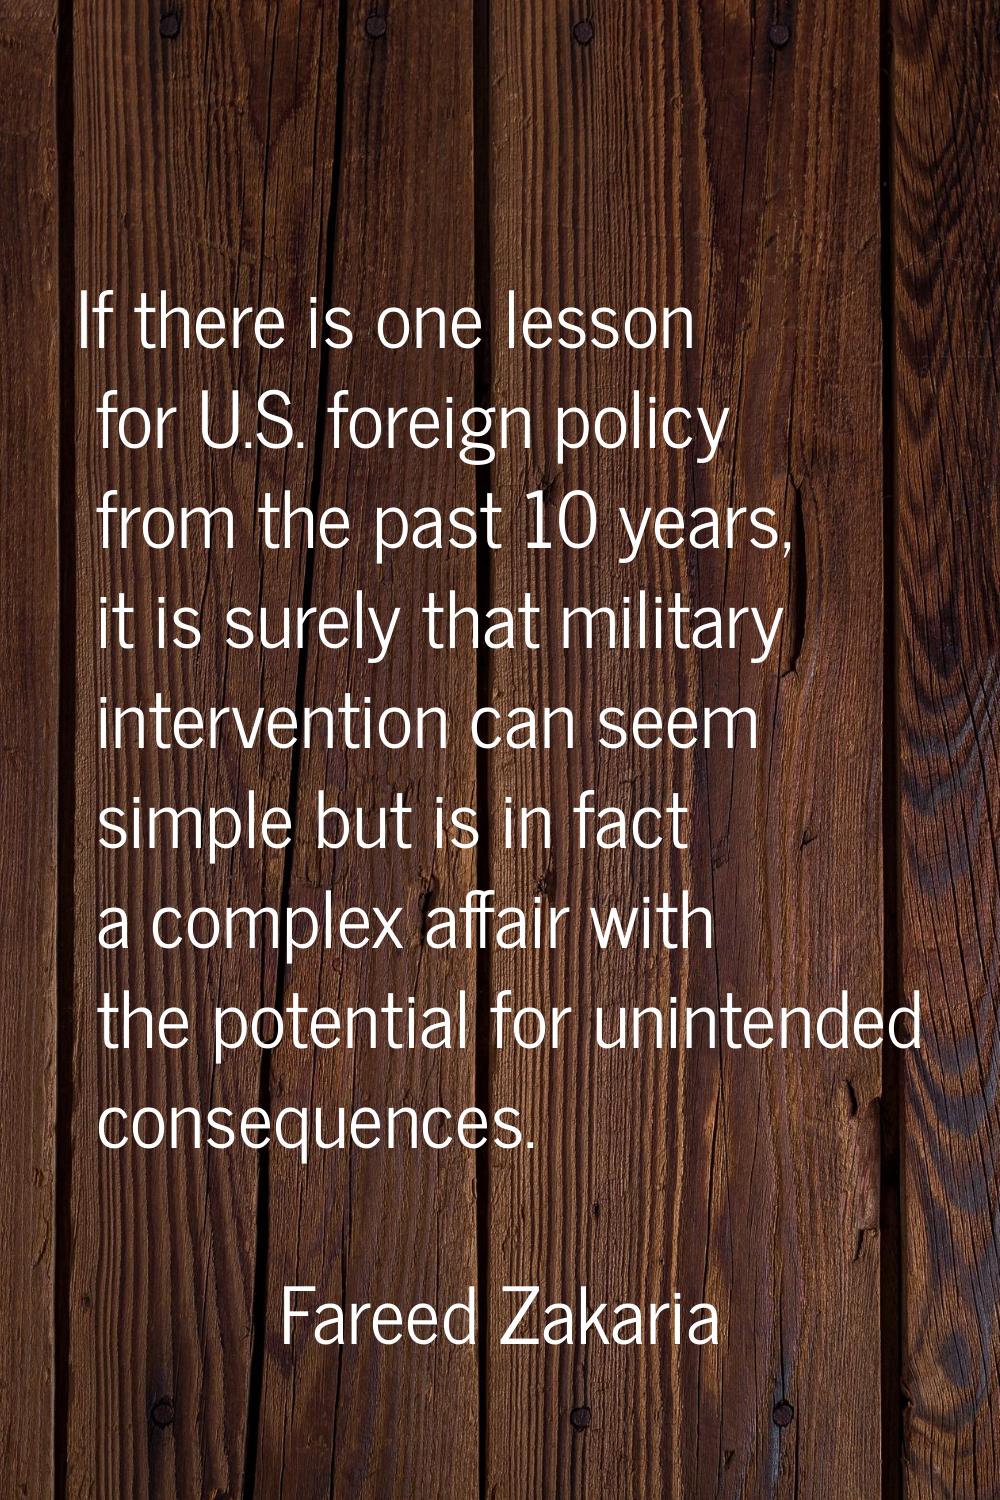 If there is one lesson for U.S. foreign policy from the past 10 years, it is surely that military i